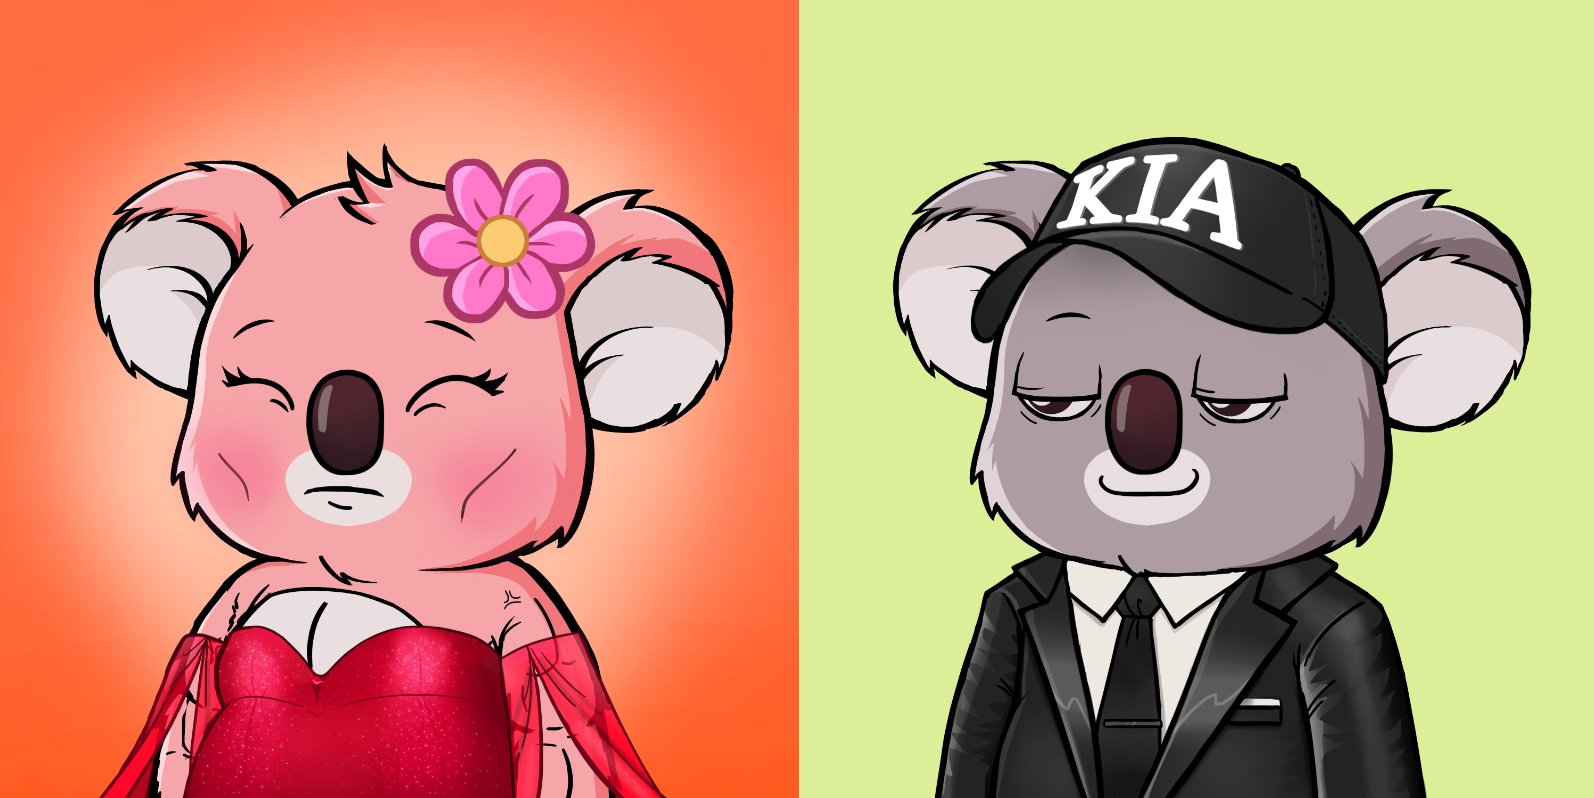 Koala Agents with exclusive traits